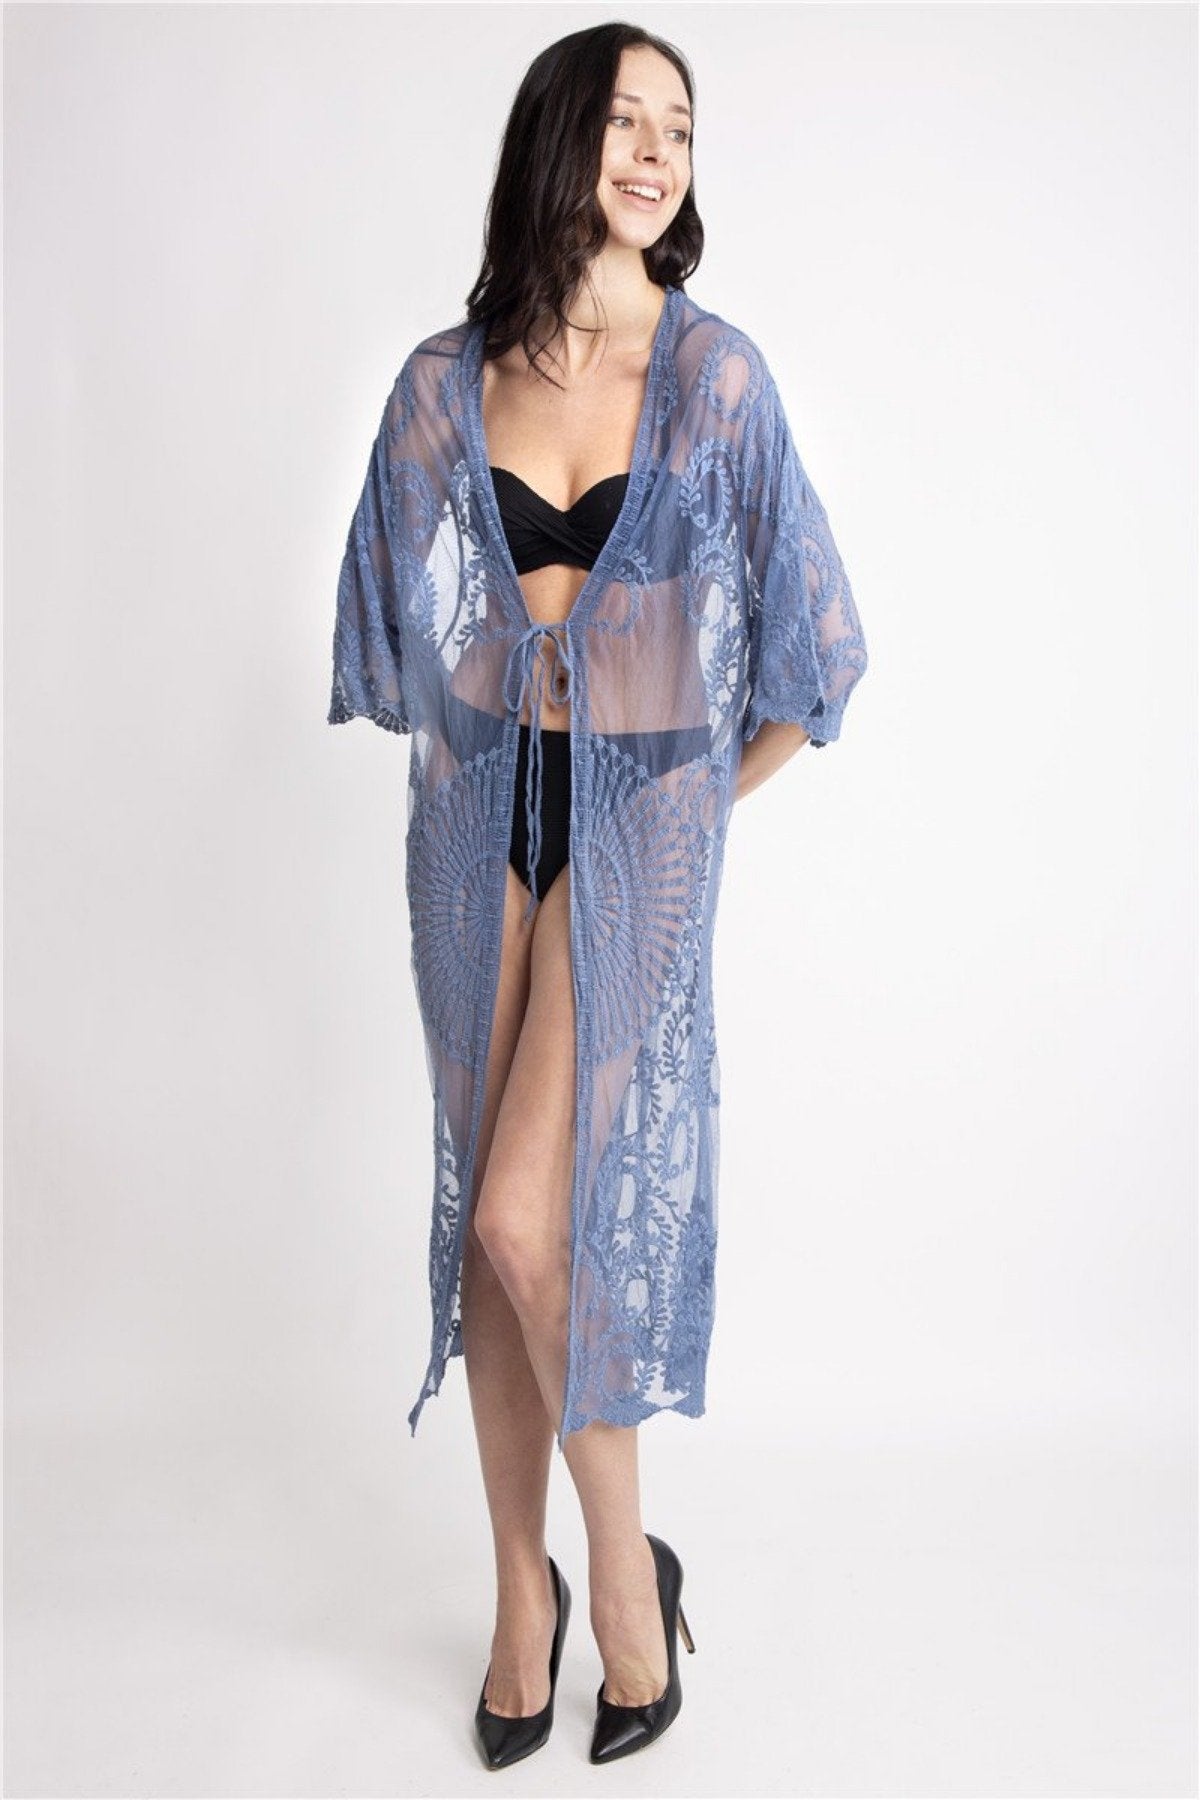 Circular Pattern Long Cover-Up W/ Tie-Knot Closure